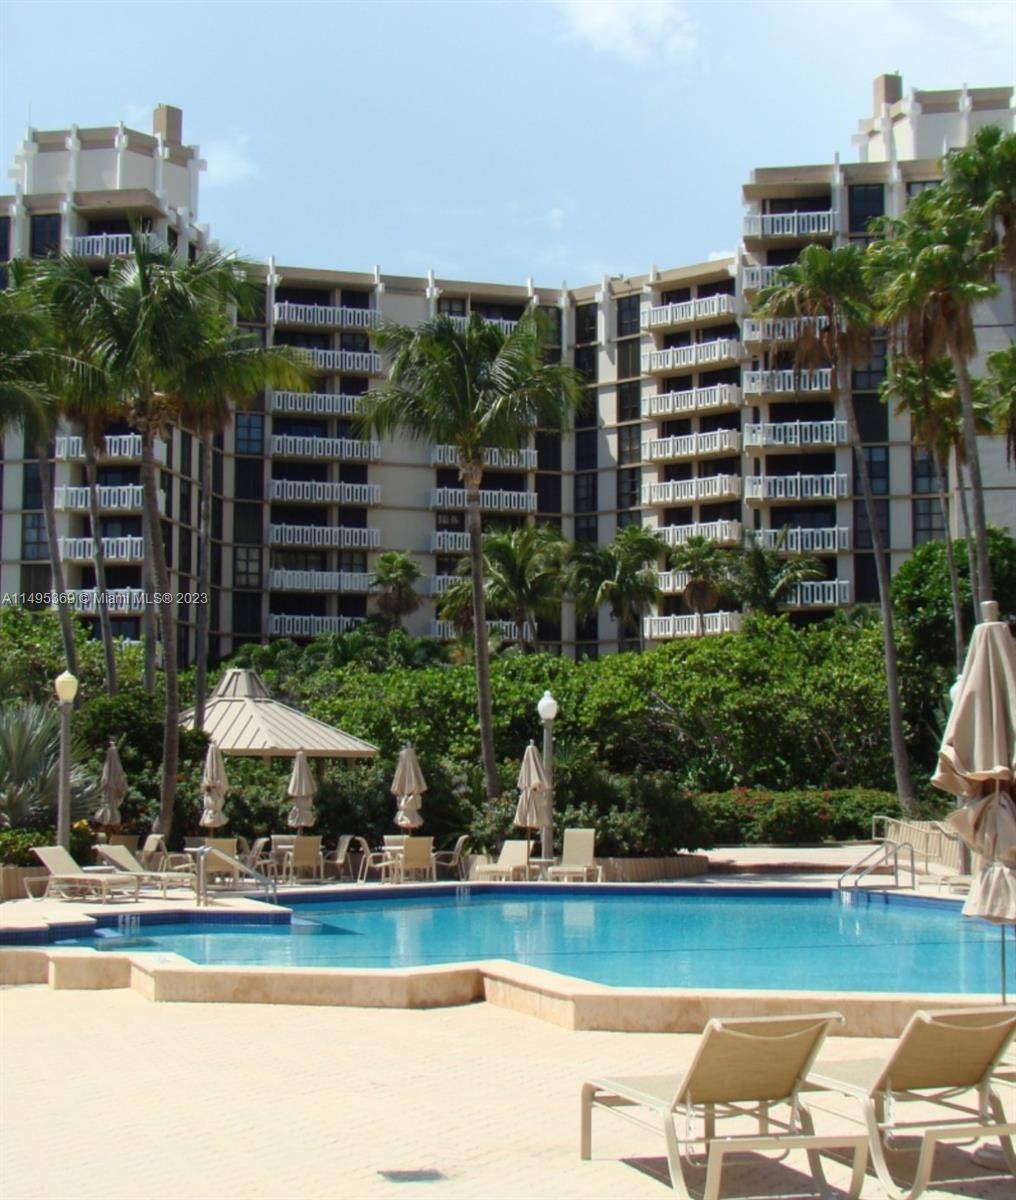 Beautiful 2 Bedroom 2 Bath, 1409 Sqft unit at The Towers Of Key Biscayne.